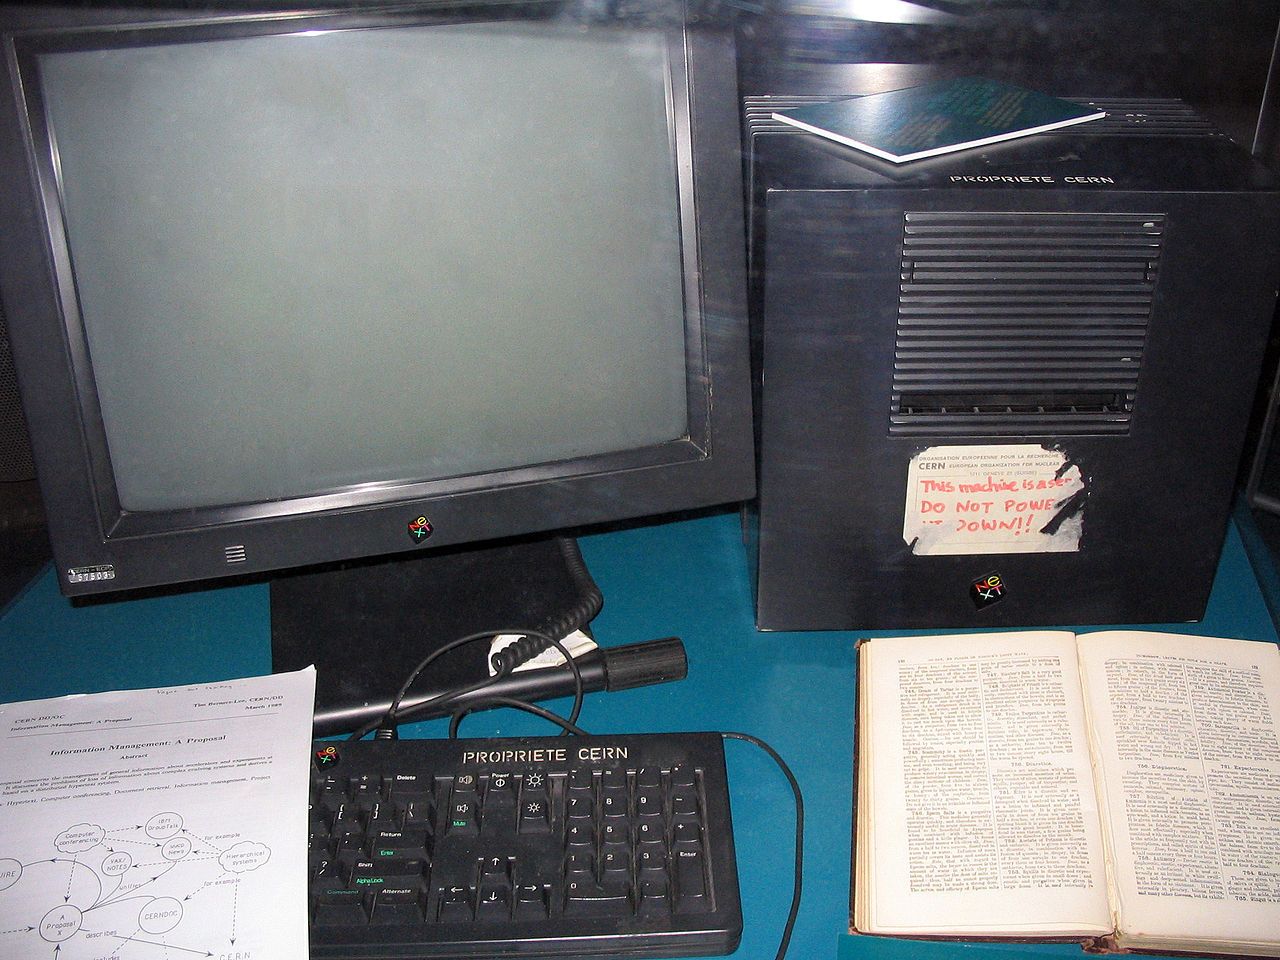 The first web server, used by Berners-Lee in the early 1990s.